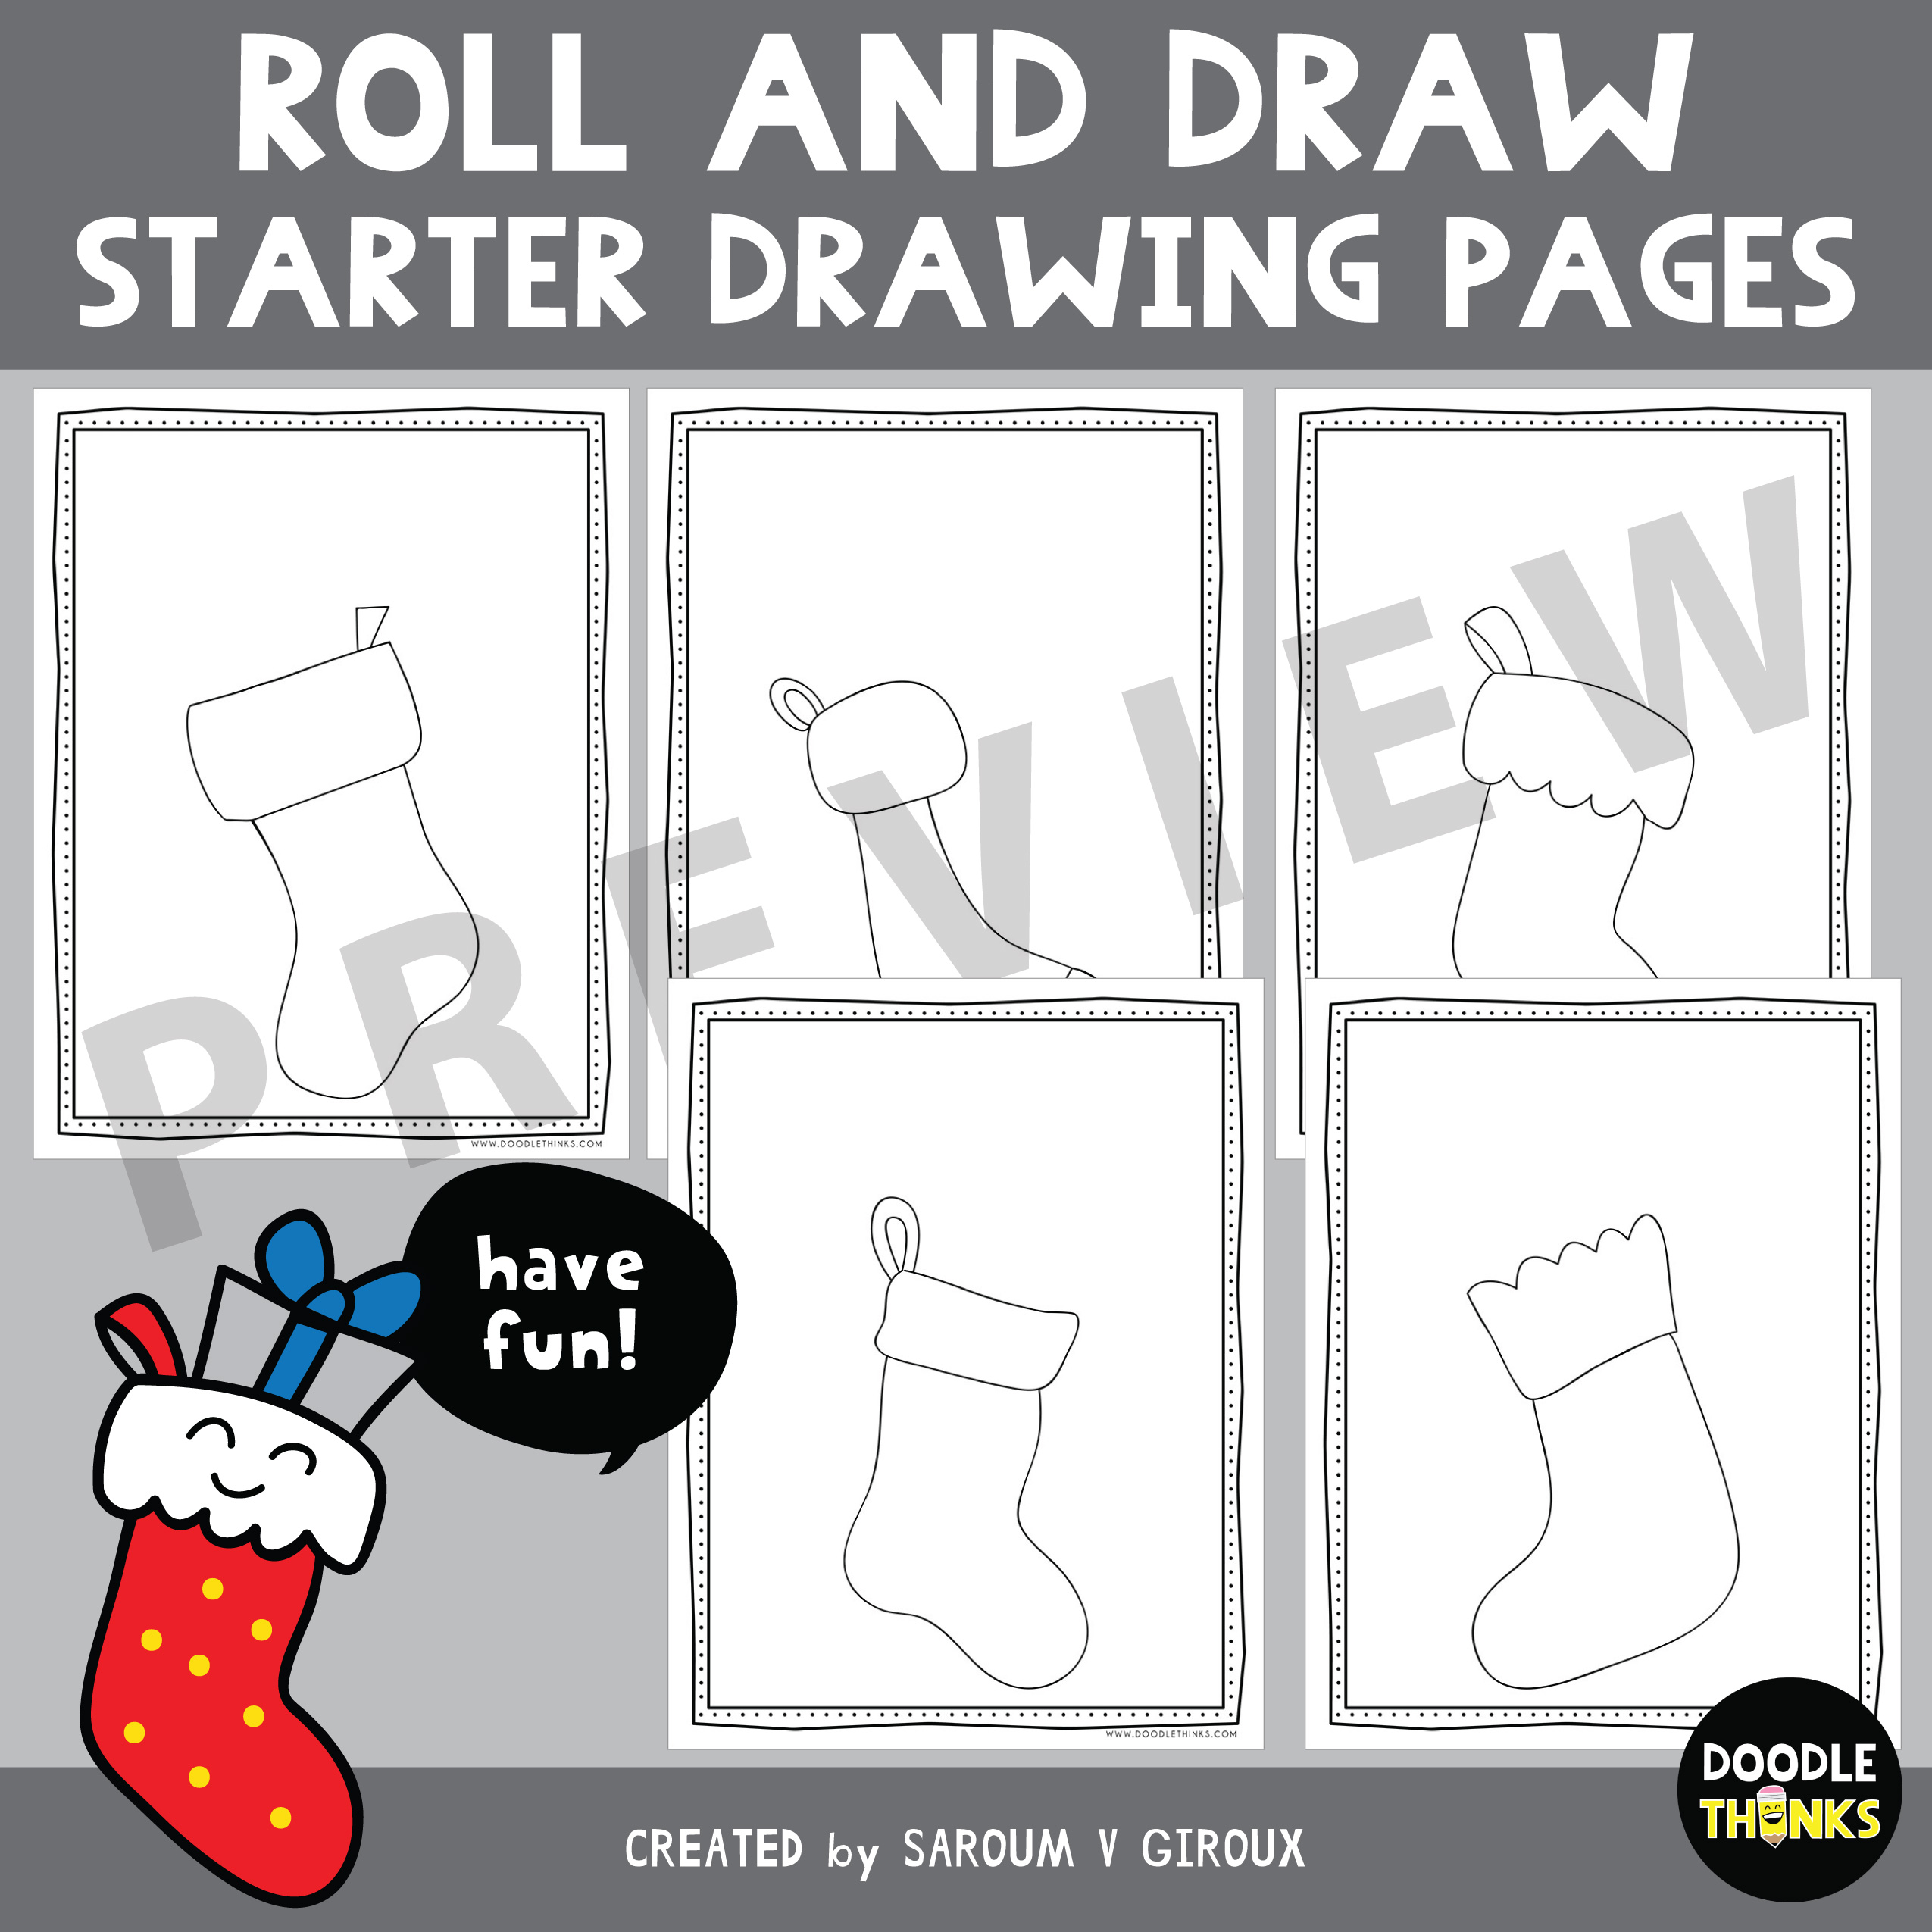 Roll and draw activity | Drawing games for kids, Drawing games, Art for kids